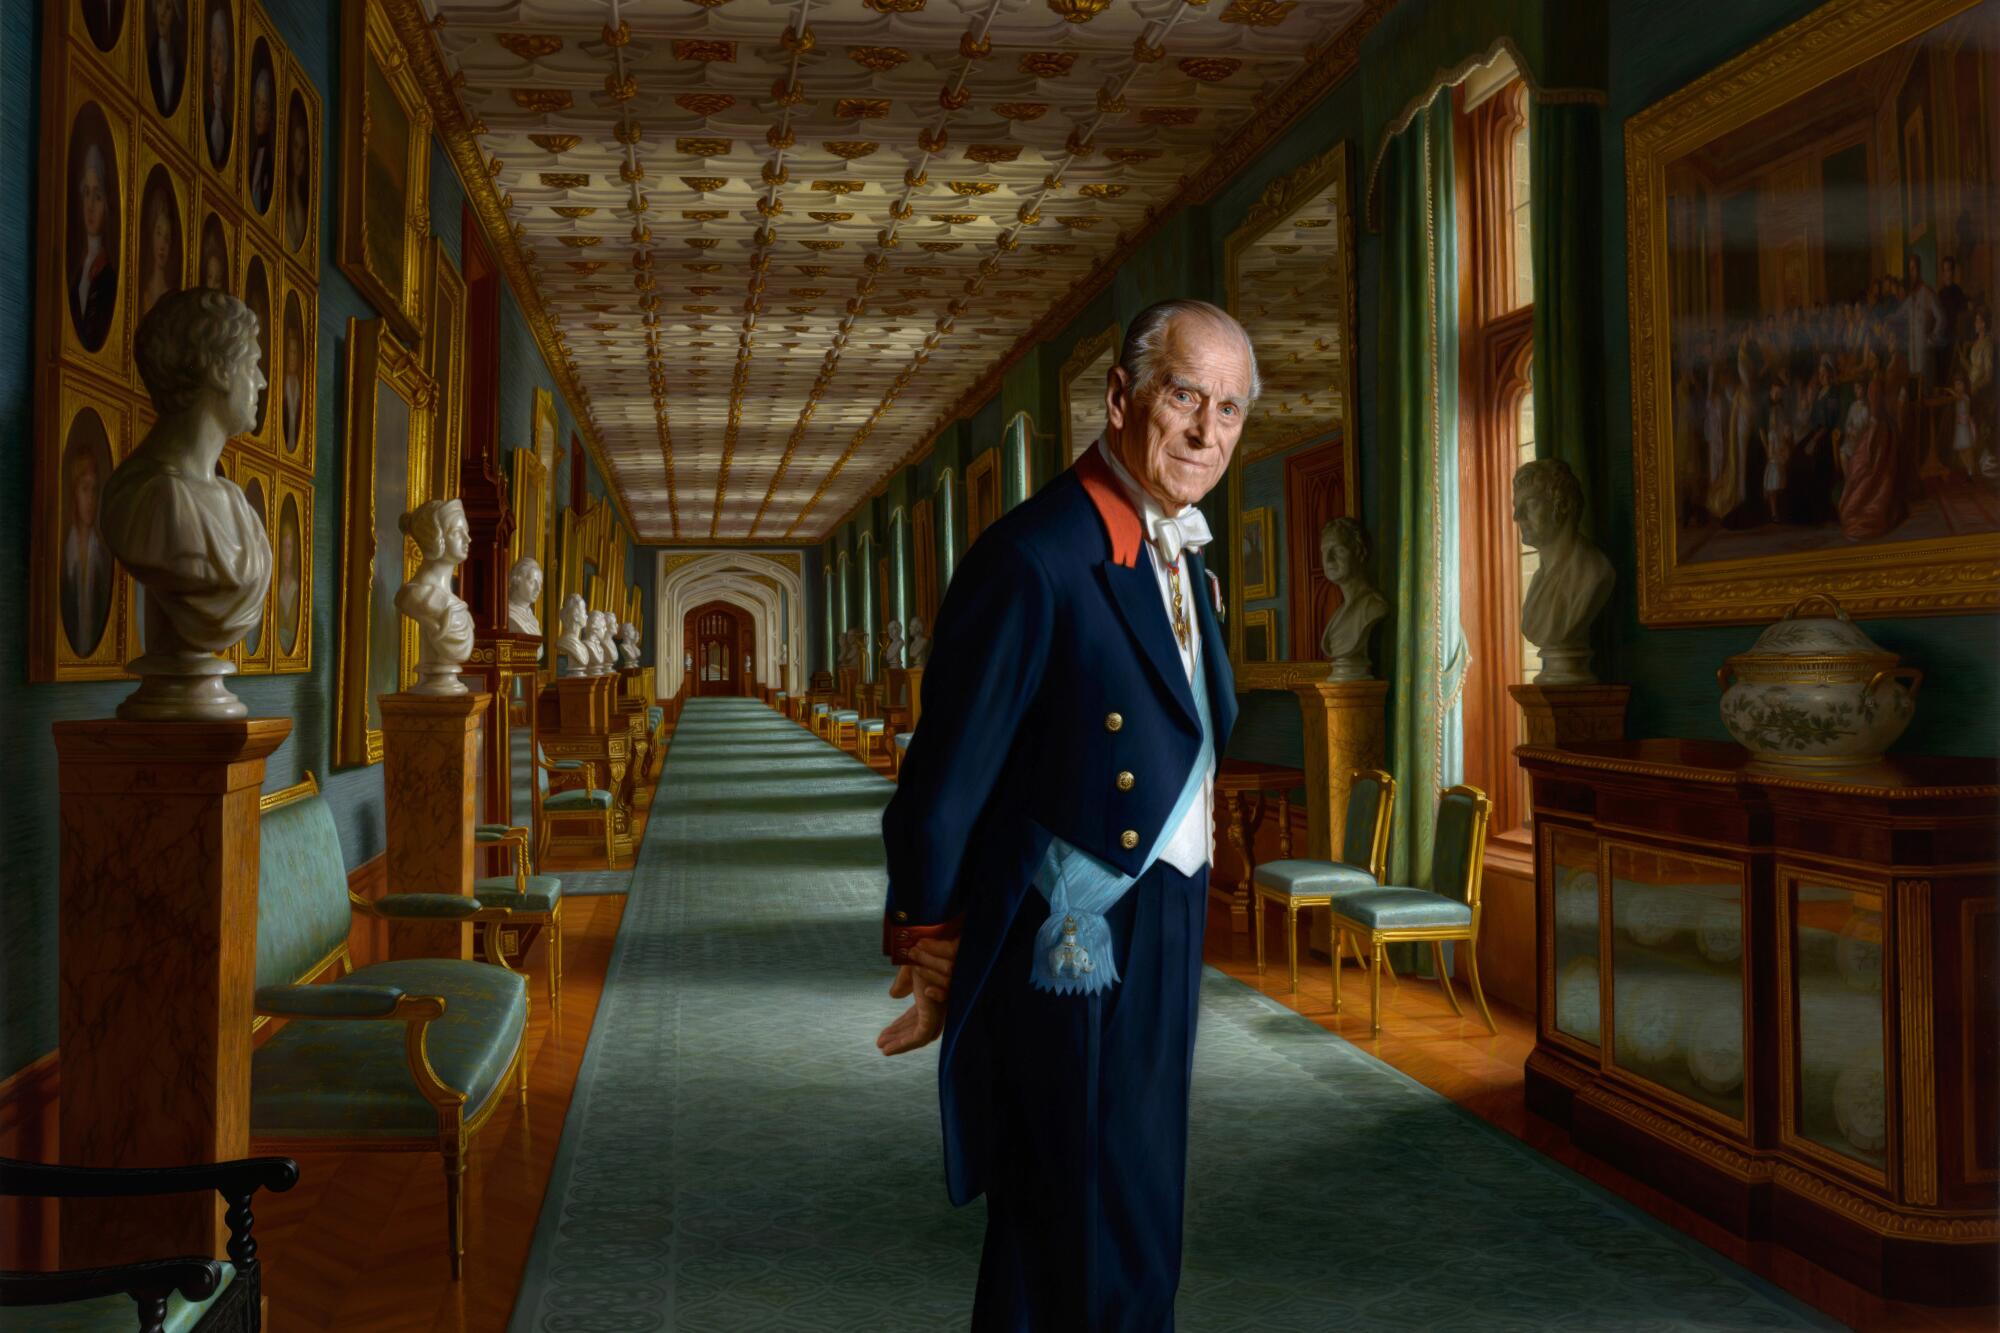 A painting of Prince Philip shows him in a royal sash with hands behind his back.